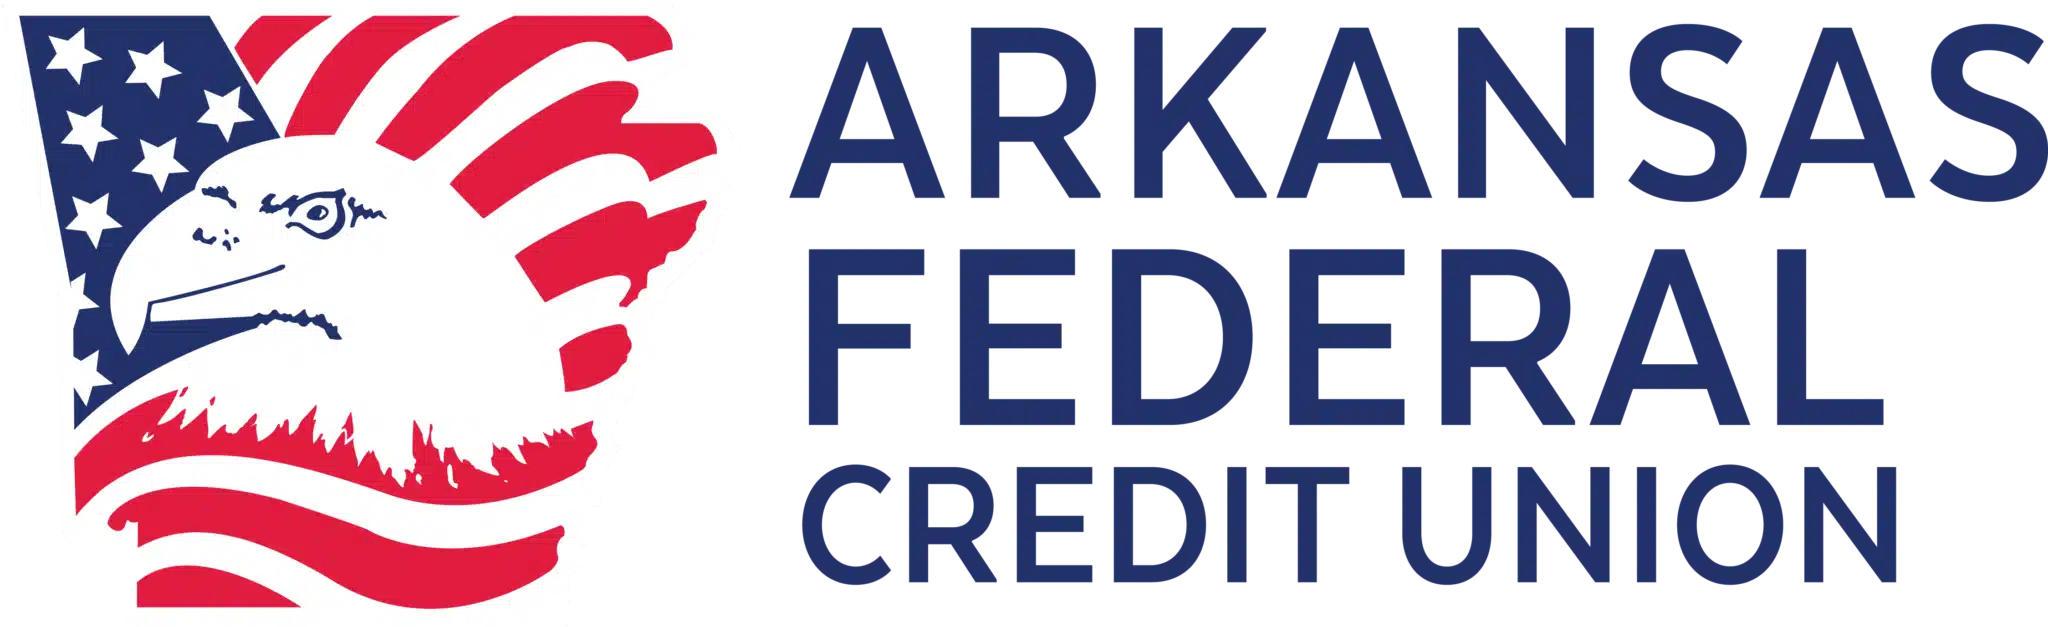 Arkansas Federal Credit Union: An Arkansas icon with the American flag and Eagle outline inside.